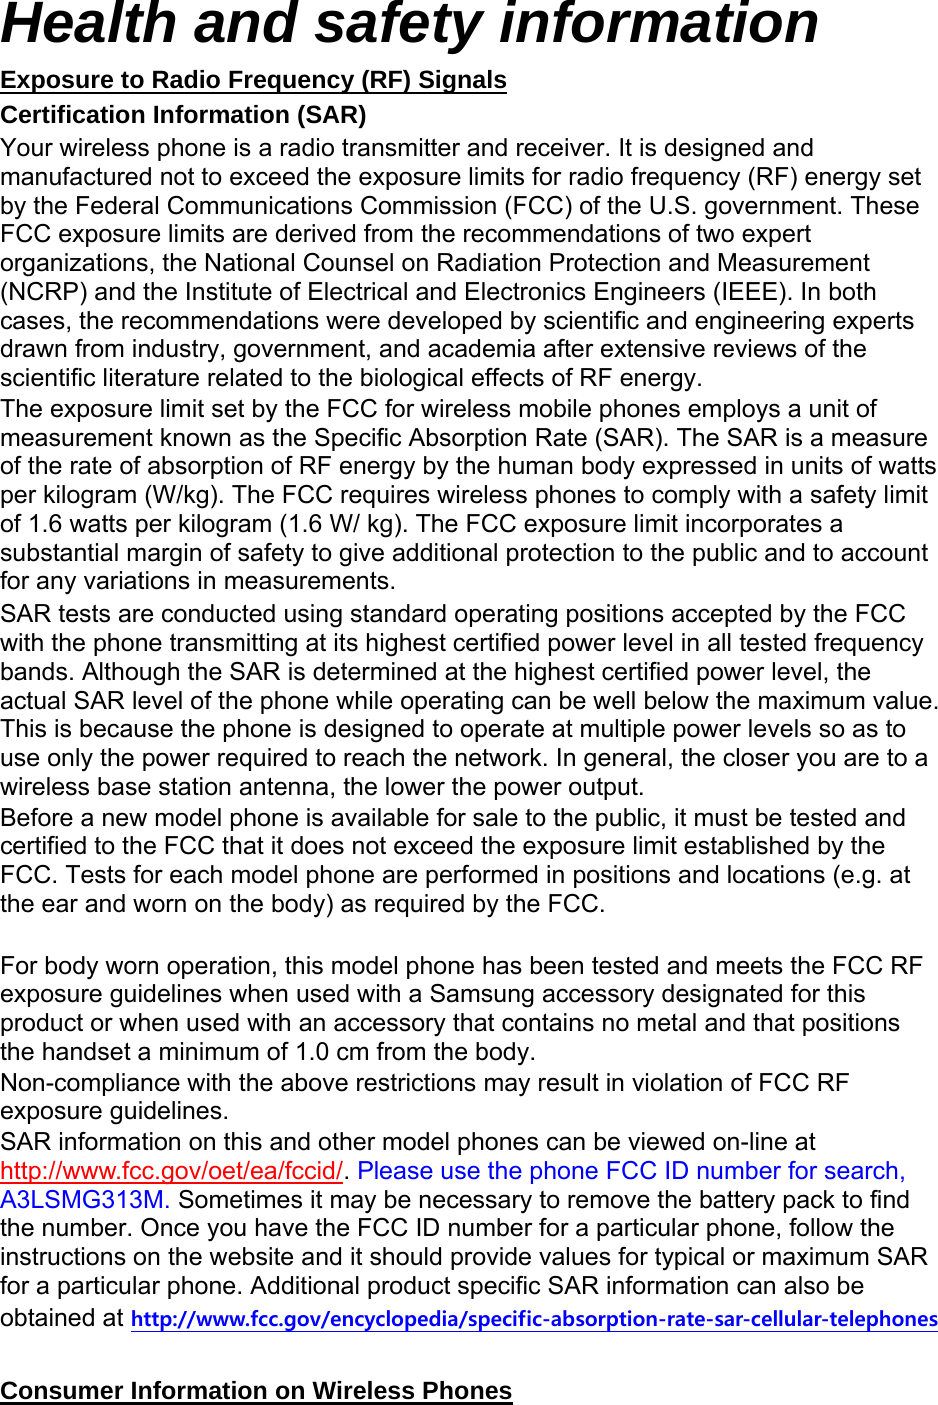 Health and safety information Exposure to Radio Frequency (RF) Signals Certification Information (SAR) Your wireless phone is a radio transmitter and receiver. It is designed and manufactured not to exceed the exposure limits for radio frequency (RF) energy set by the Federal Communications Commission (FCC) of the U.S. government. These FCC exposure limits are derived from the recommendations of two expert organizations, the National Counsel on Radiation Protection and Measurement (NCRP) and the Institute of Electrical and Electronics Engineers (IEEE). In both cases, the recommendations were developed by scientific and engineering experts drawn from industry, government, and academia after extensive reviews of the scientific literature related to the biological effects of RF energy. The exposure limit set by the FCC for wireless mobile phones employs a unit of measurement known as the Specific Absorption Rate (SAR). The SAR is a measure of the rate of absorption of RF energy by the human body expressed in units of watts per kilogram (W/kg). The FCC requires wireless phones to comply with a safety limit of 1.6 watts per kilogram (1.6 W/ kg). The FCC exposure limit incorporates a substantial margin of safety to give additional protection to the public and to account for any variations in measurements. SAR tests are conducted using standard operating positions accepted by the FCC with the phone transmitting at its highest certified power level in all tested frequency bands. Although the SAR is determined at the highest certified power level, the actual SAR level of the phone while operating can be well below the maximum value. This is because the phone is designed to operate at multiple power levels so as to use only the power required to reach the network. In general, the closer you are to a wireless base station antenna, the lower the power output. Before a new model phone is available for sale to the public, it must be tested and certified to the FCC that it does not exceed the exposure limit established by the FCC. Tests for each model phone are performed in positions and locations (e.g. at the ear and worn on the body) as required by the FCC.      For body worn operation, this model phone has been tested and meets the FCC RF exposure guidelines when used with a Samsung accessory designated for this product or when used with an accessory that contains no metal and that positions the handset a minimum of 1.0 cm from the body.   Non-compliance with the above restrictions may result in violation of FCC RF exposure guidelines. SAR information on this and other model phones can be viewed on-line at http://www.fcc.gov/oet/ea/fccid/. Please use the phone FCC ID number for search, A3LSMG313M. Sometimes it may be necessary to remove the battery pack to find the number. Once you have the FCC ID number for a particular phone, follow the instructions on the website and it should provide values for typical or maximum SAR for a particular phone. Additional product specific SAR information can also be obtained at http://www.fcc.gov/encyclopedia/specific-absorption-rate-sar-cellular-telephones  Consumer Information on Wireless Phones 